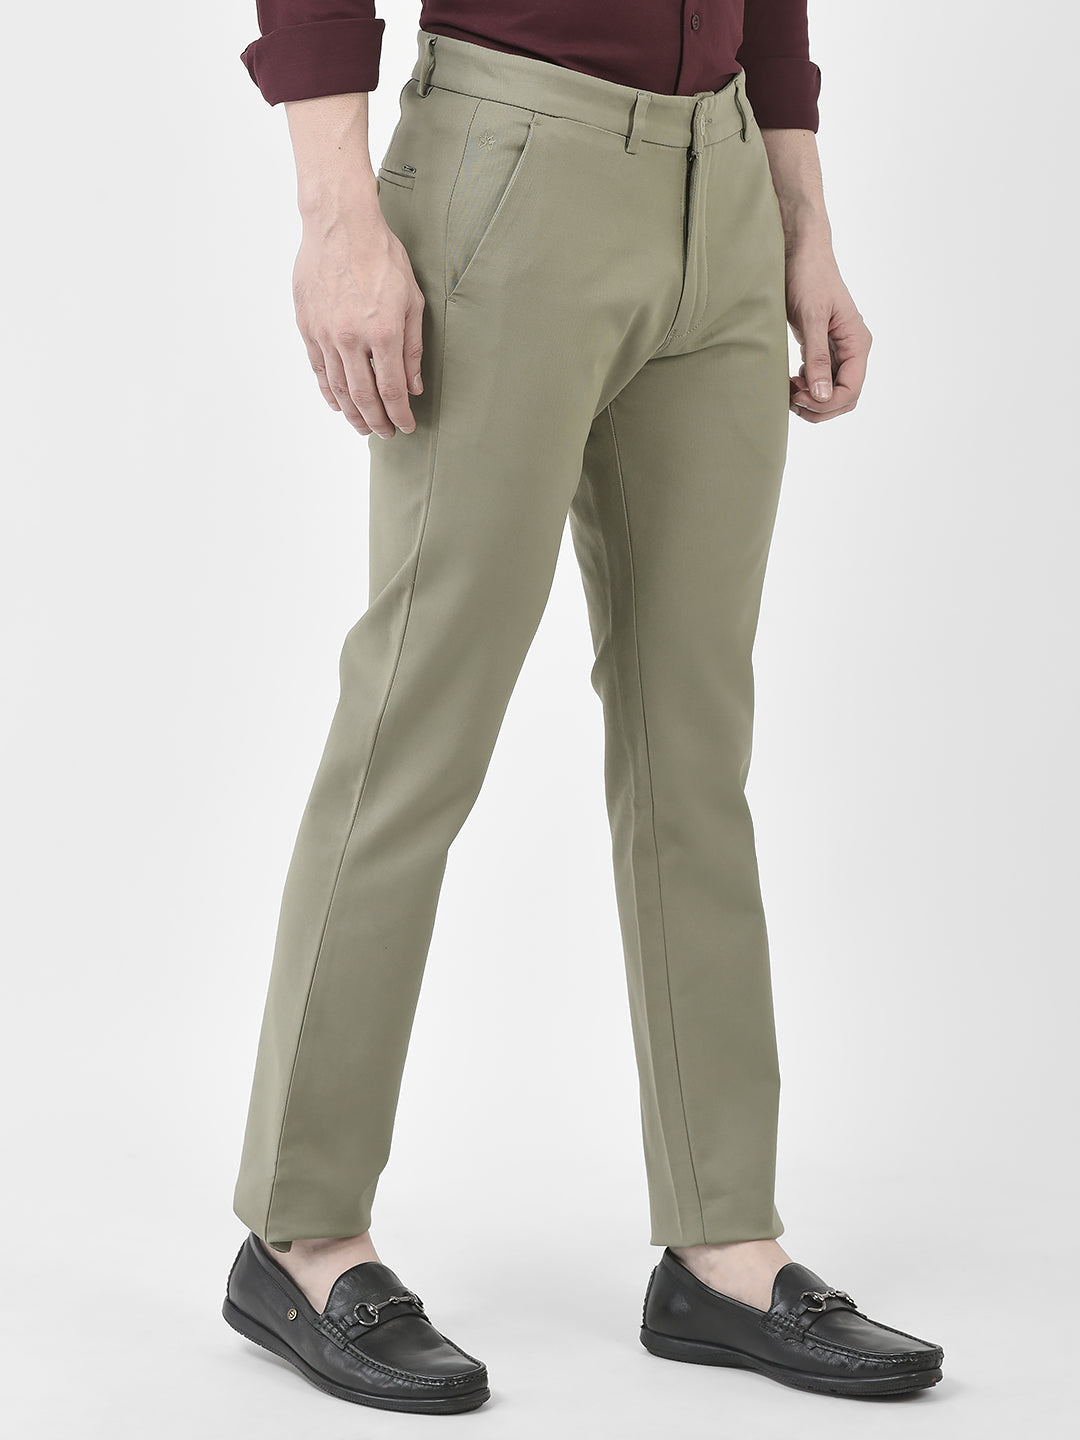  Formal Green Trousers